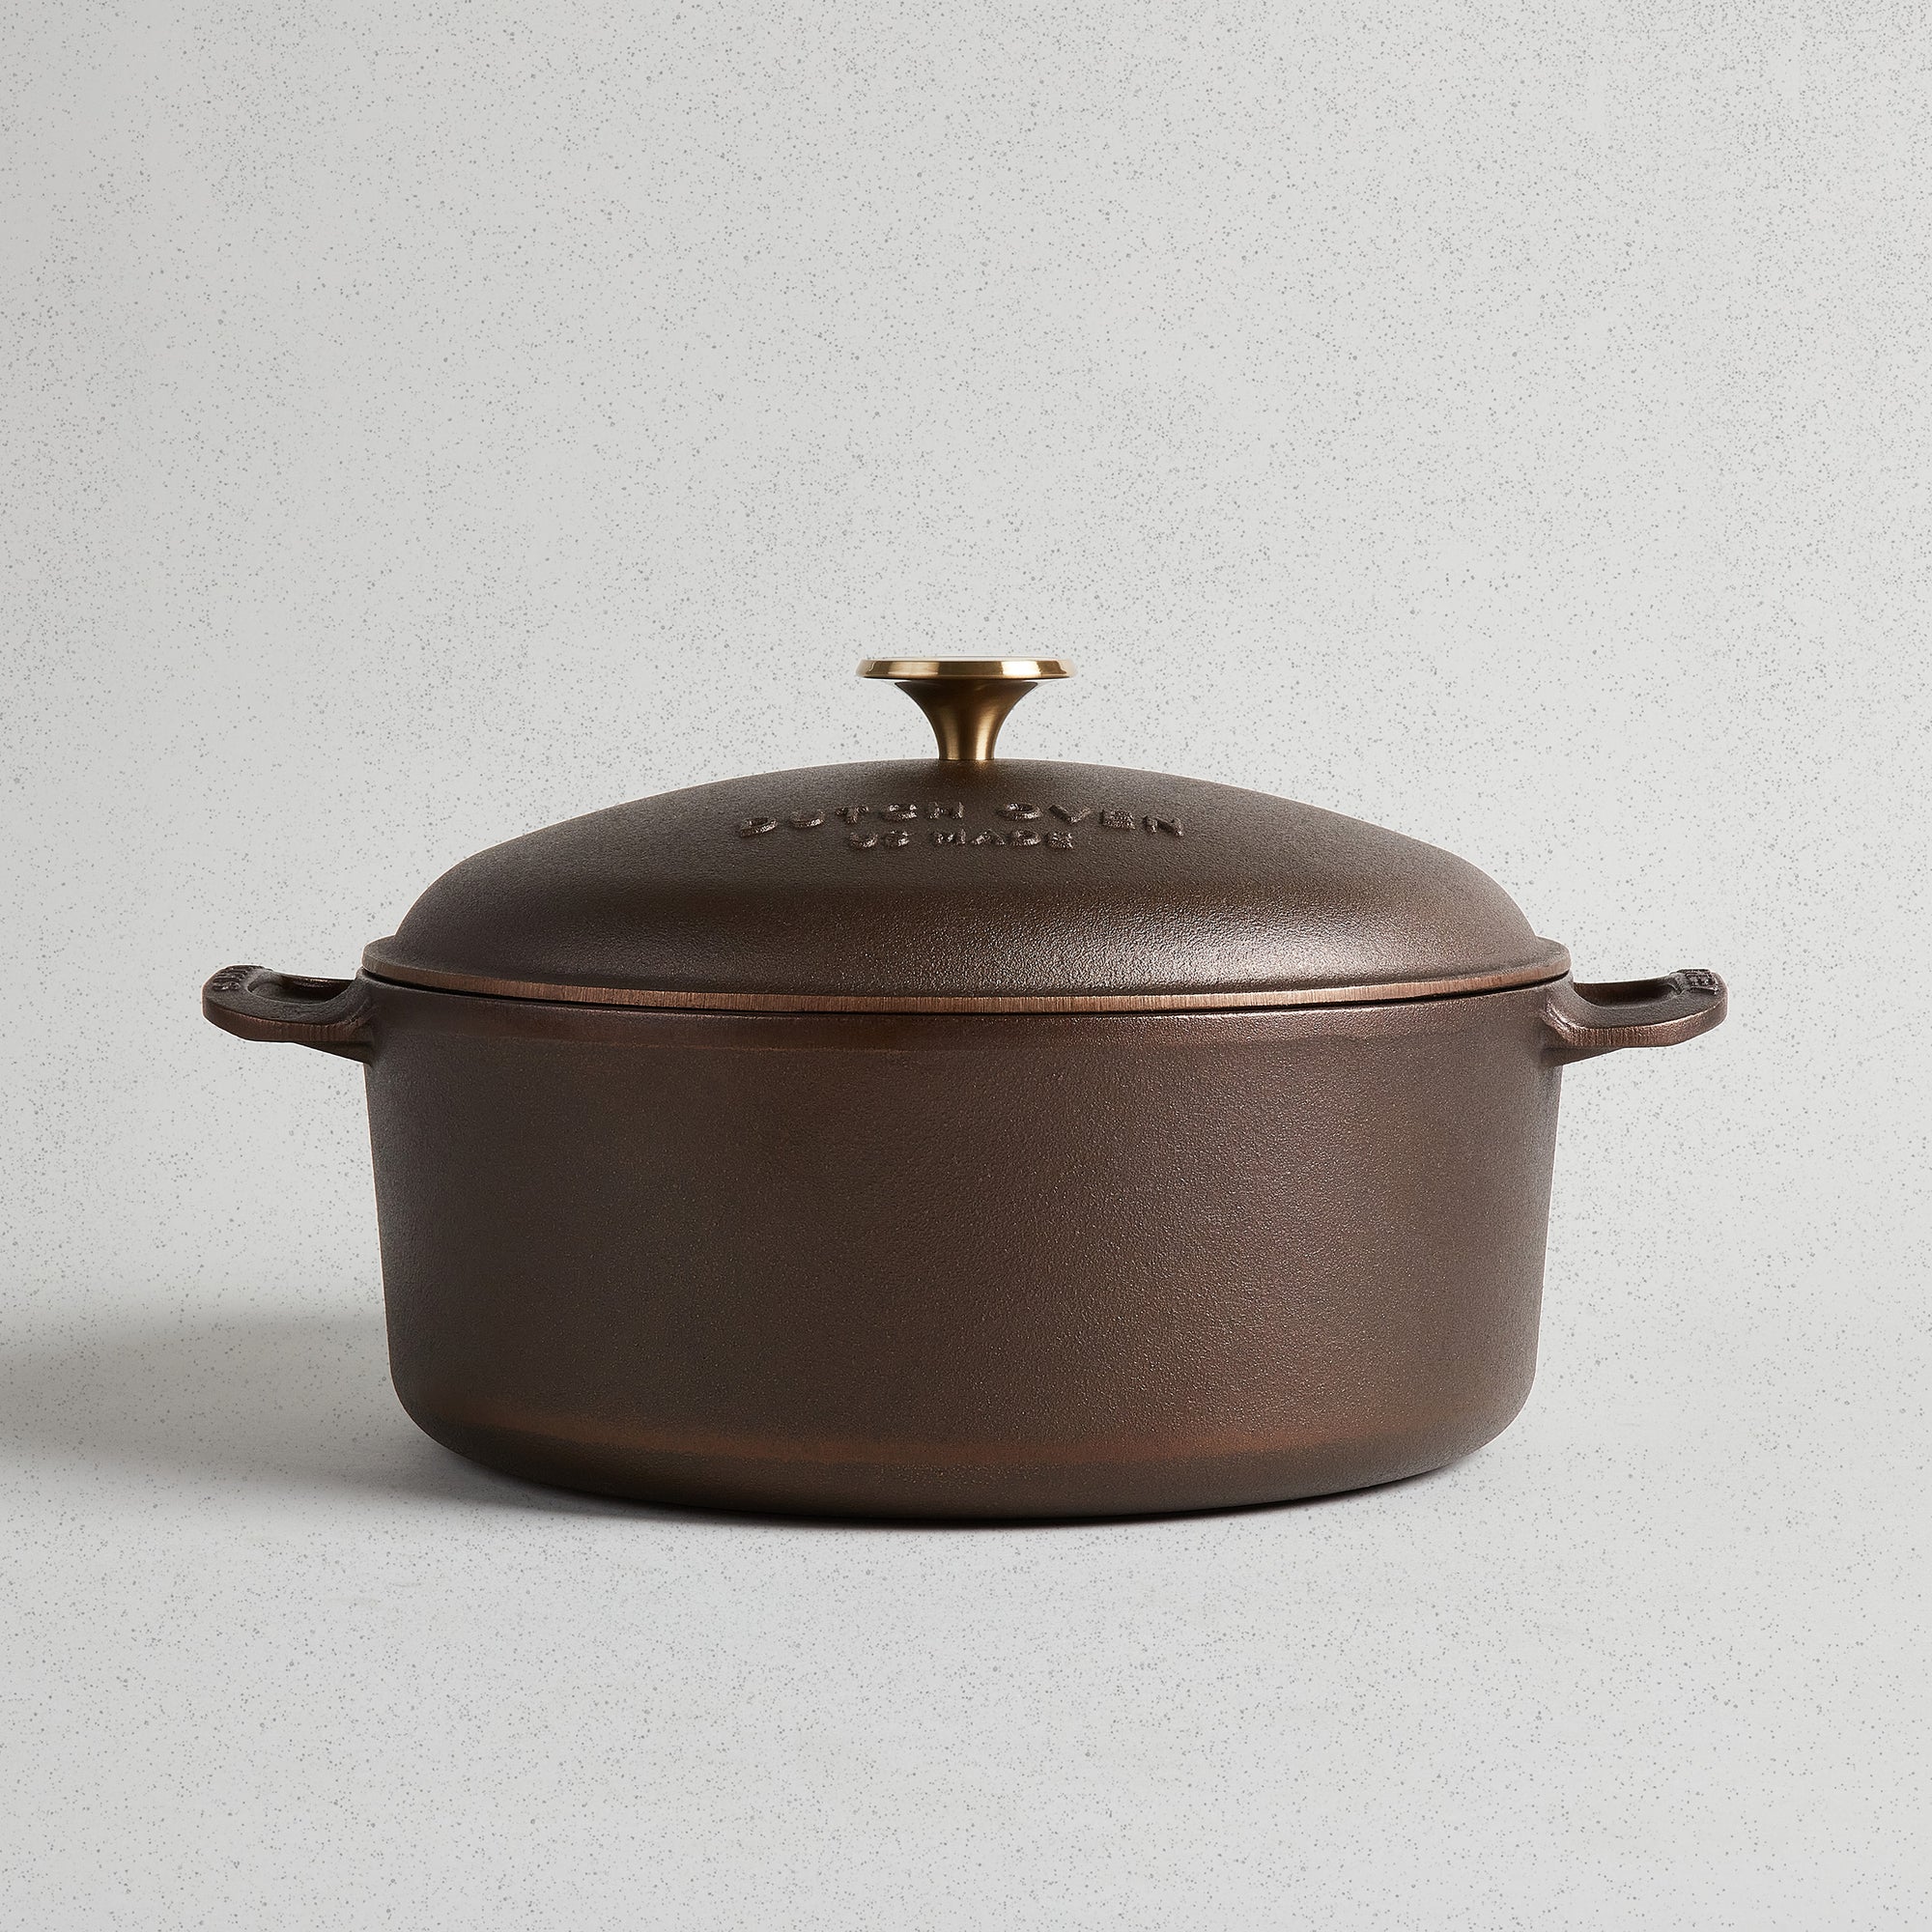 Made In Dutch Oven Review: The best Dutch oven we've tested - Reviewed